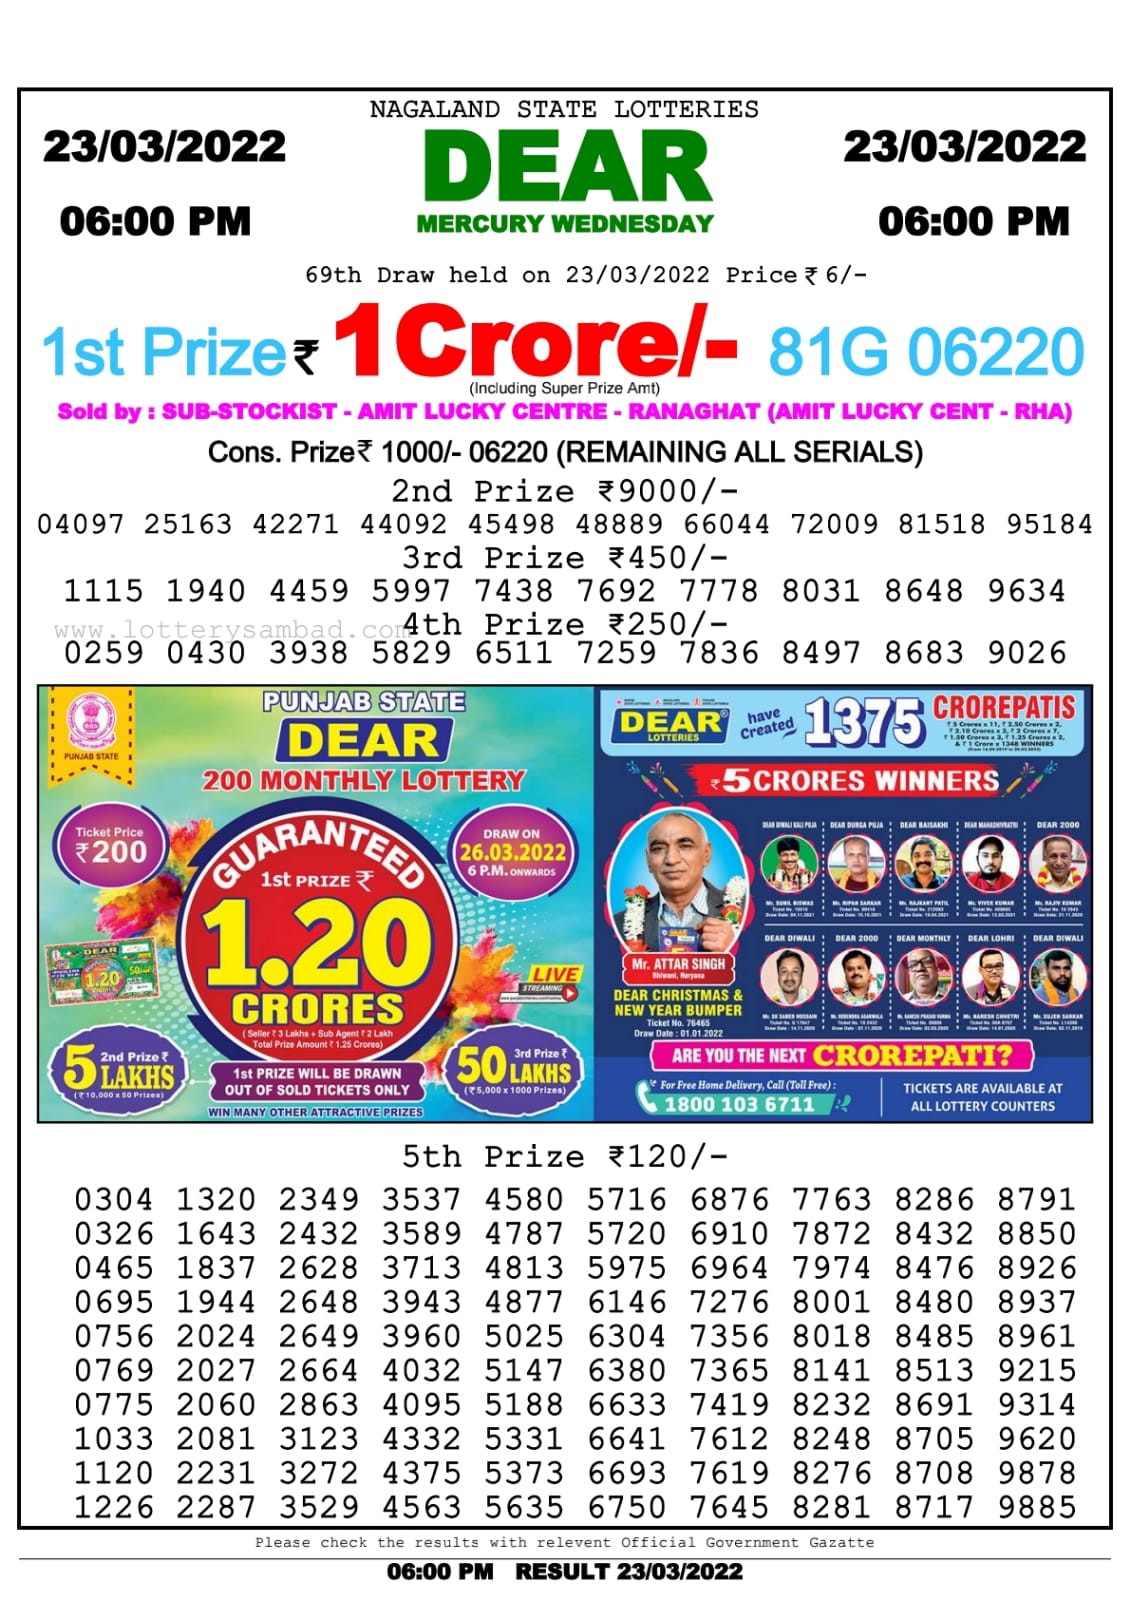 Dear Lottery Nagaland state Lottery Results 06.00 pm 23.03.2022